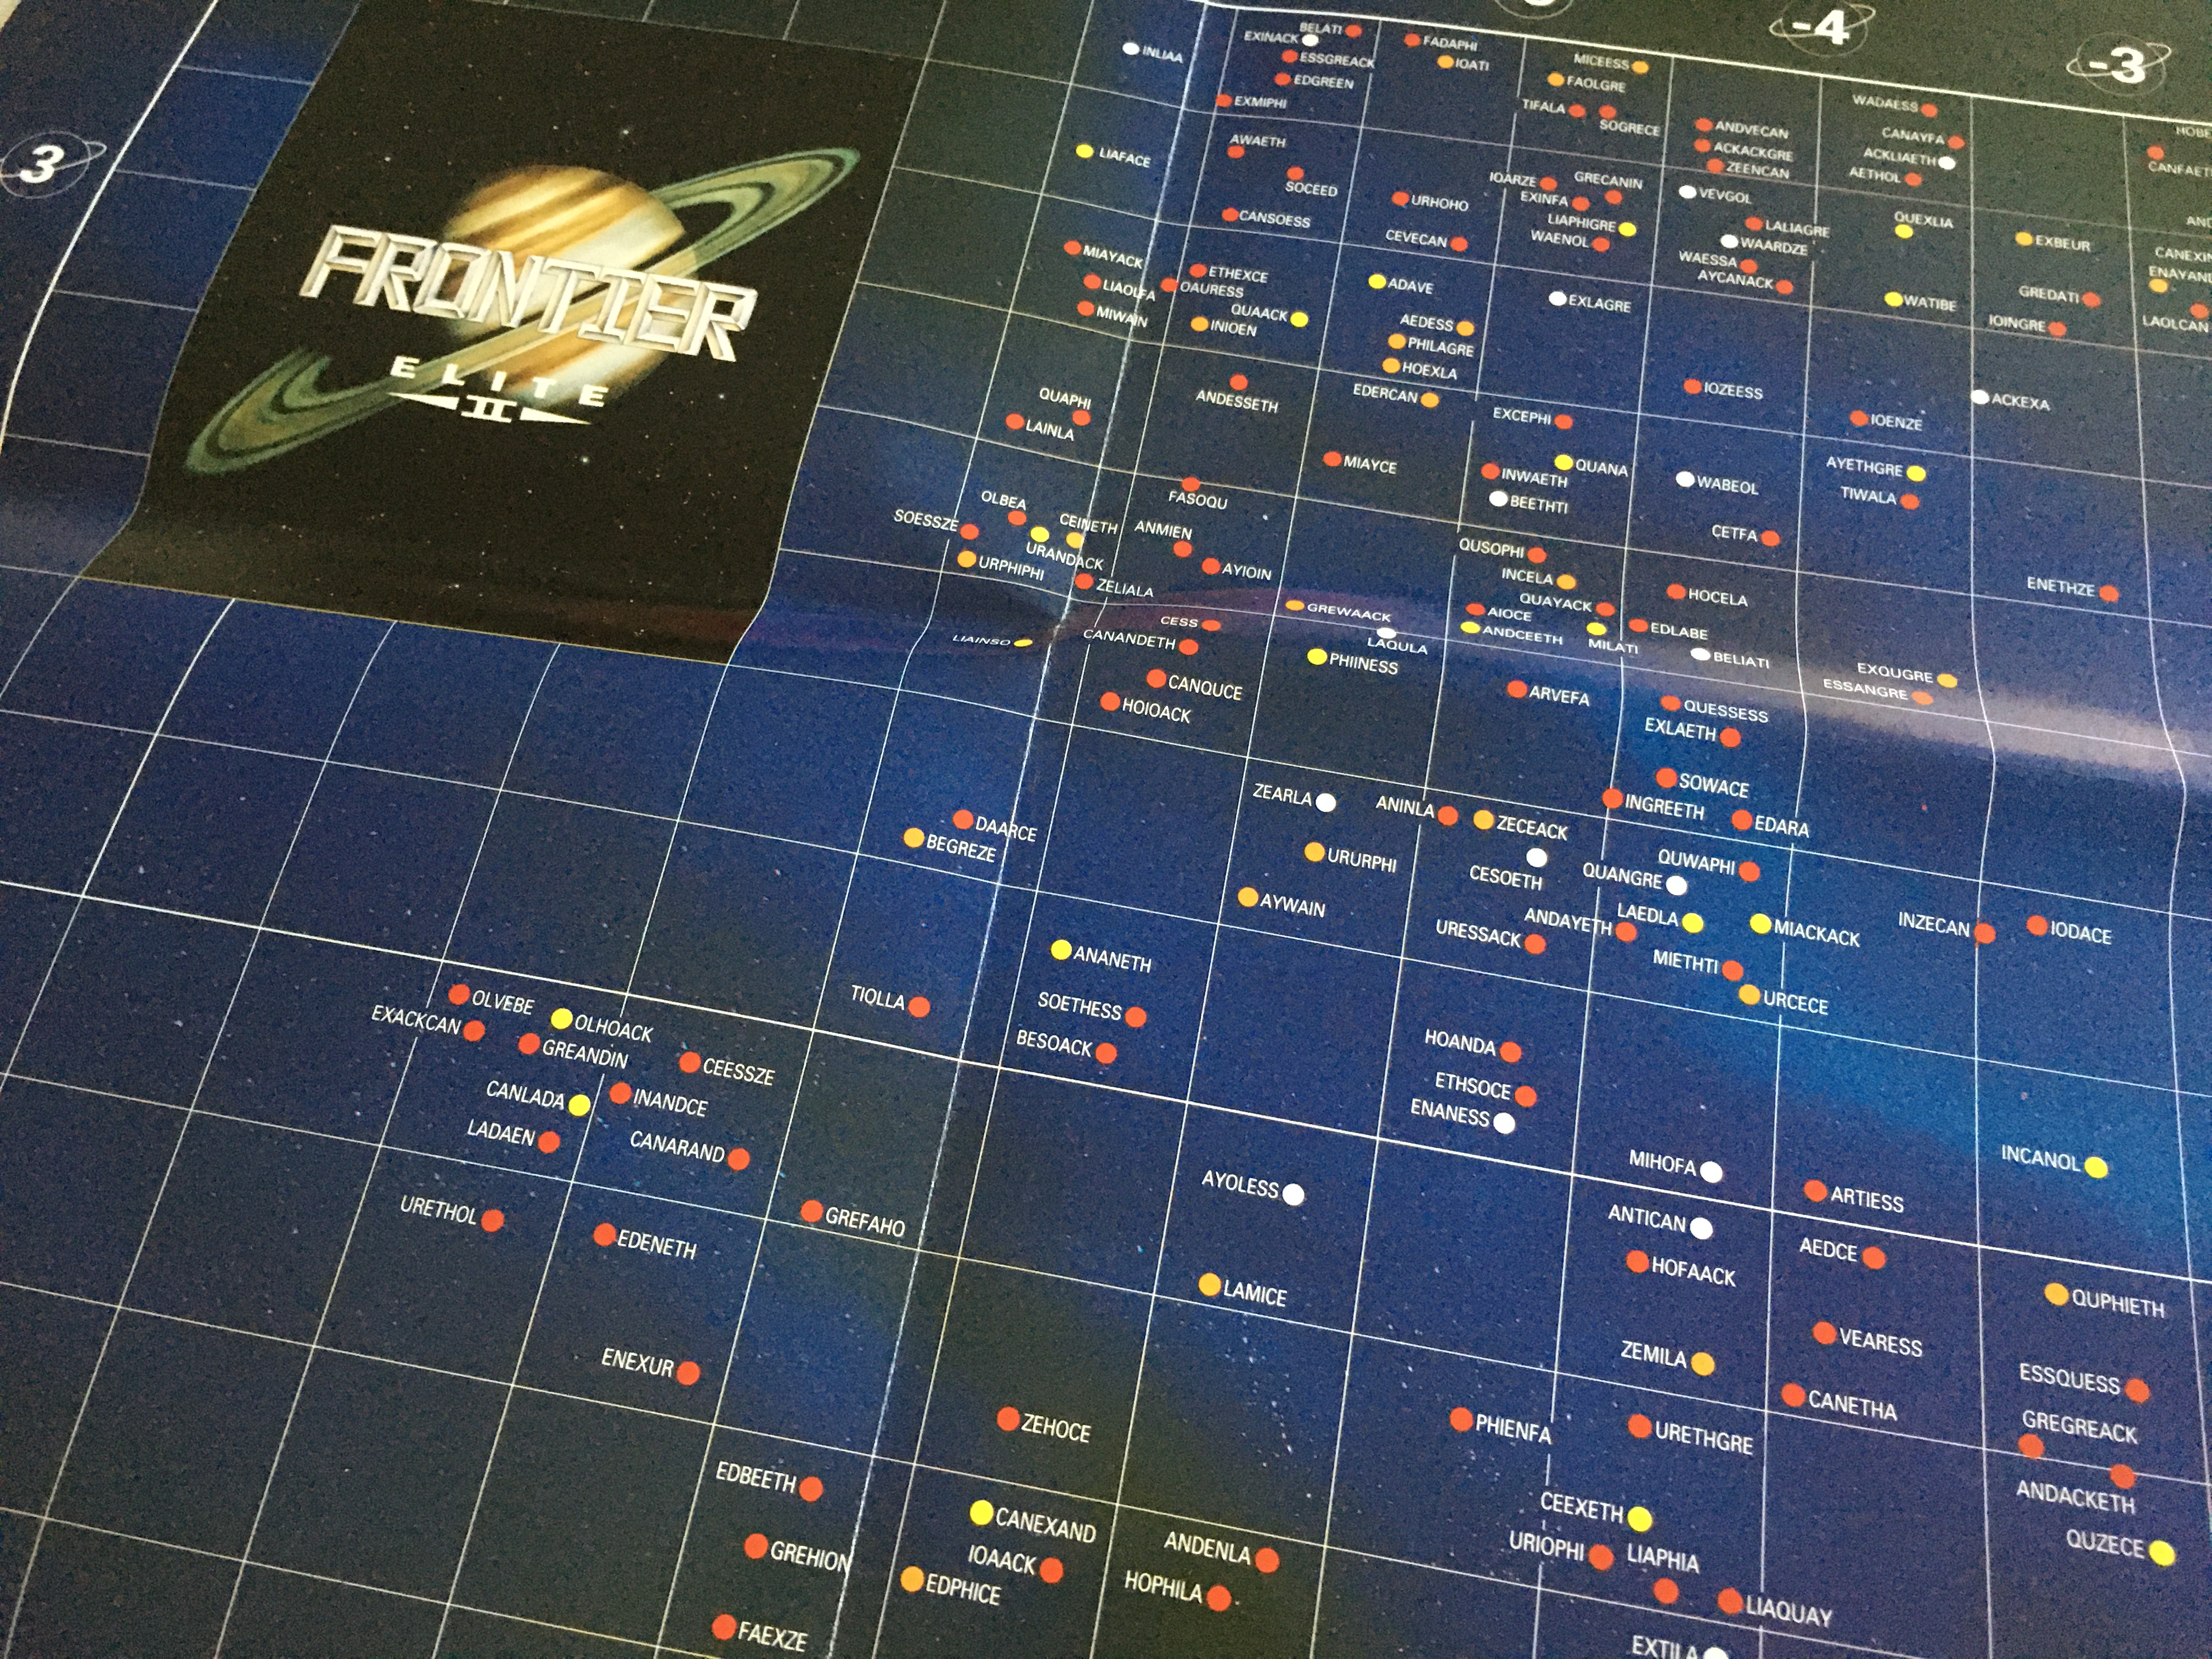 The map provided with Frontier: Elite II is a star chart showing various system to which the player can jump.